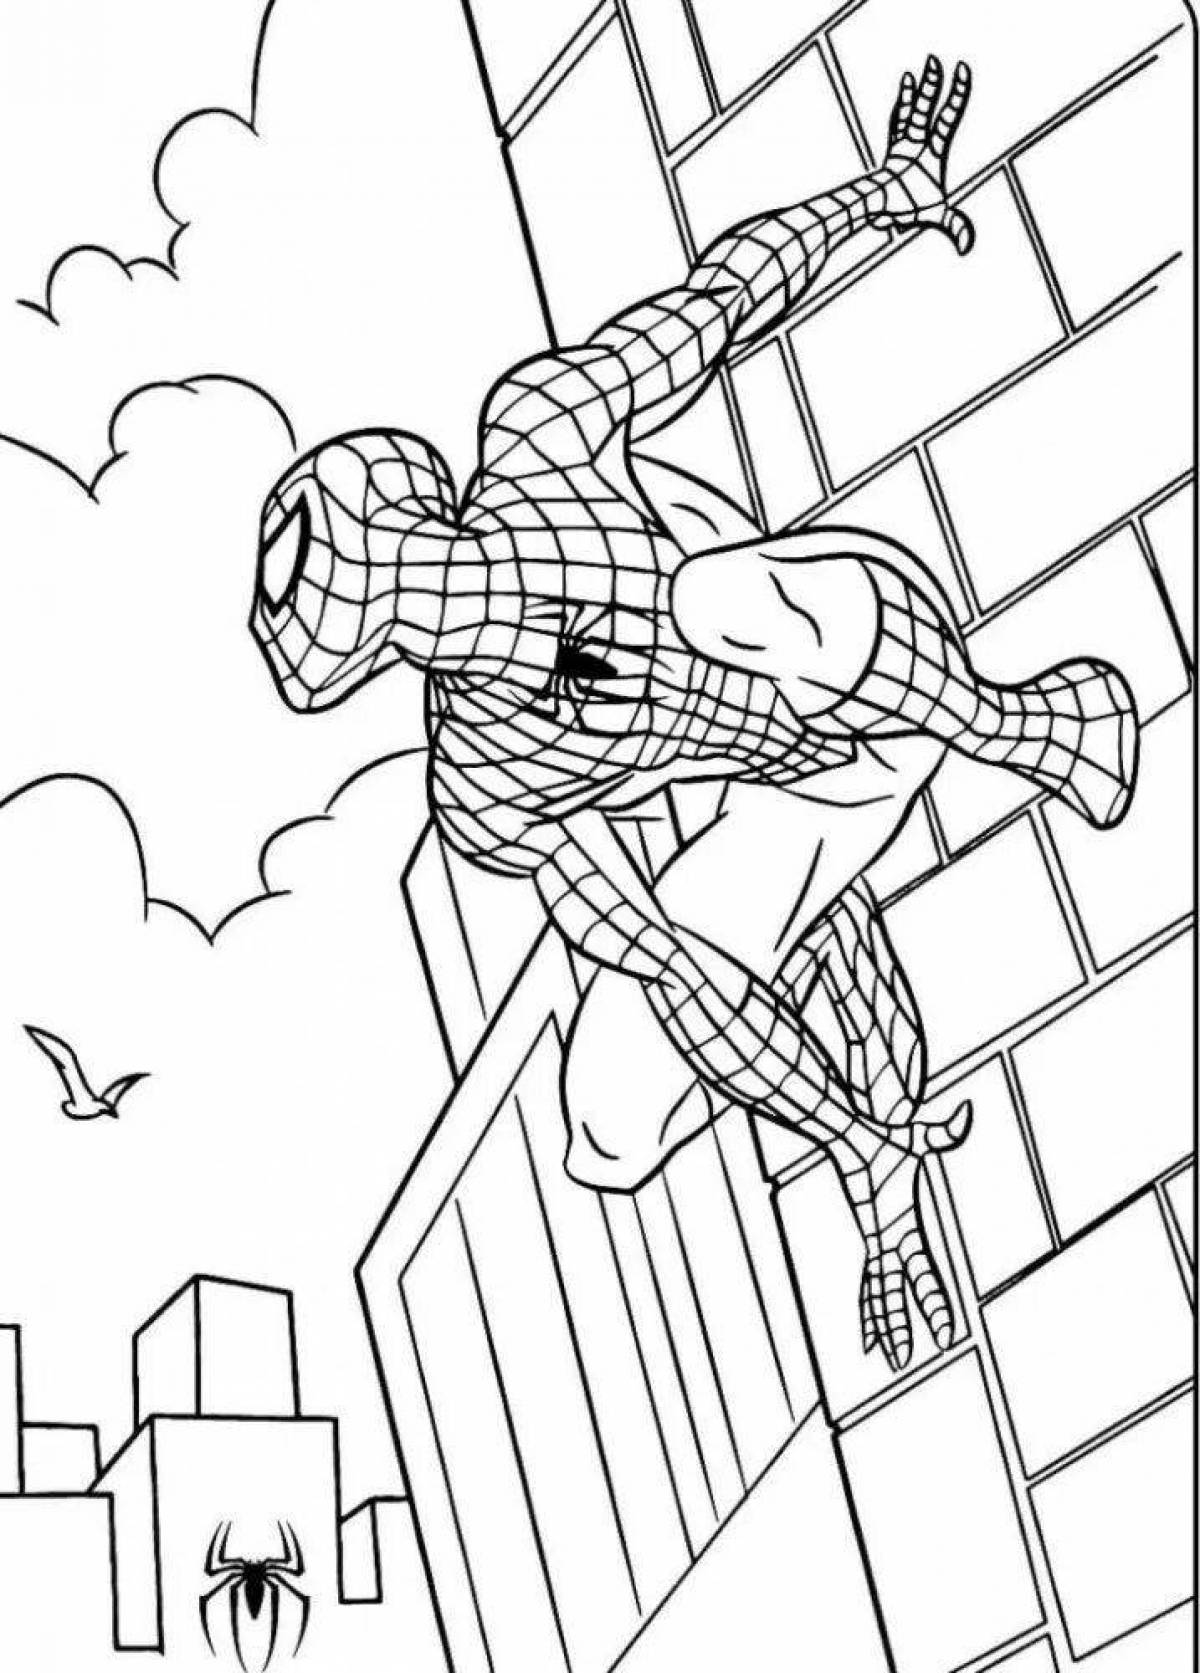 Colorful spiderman coloring page